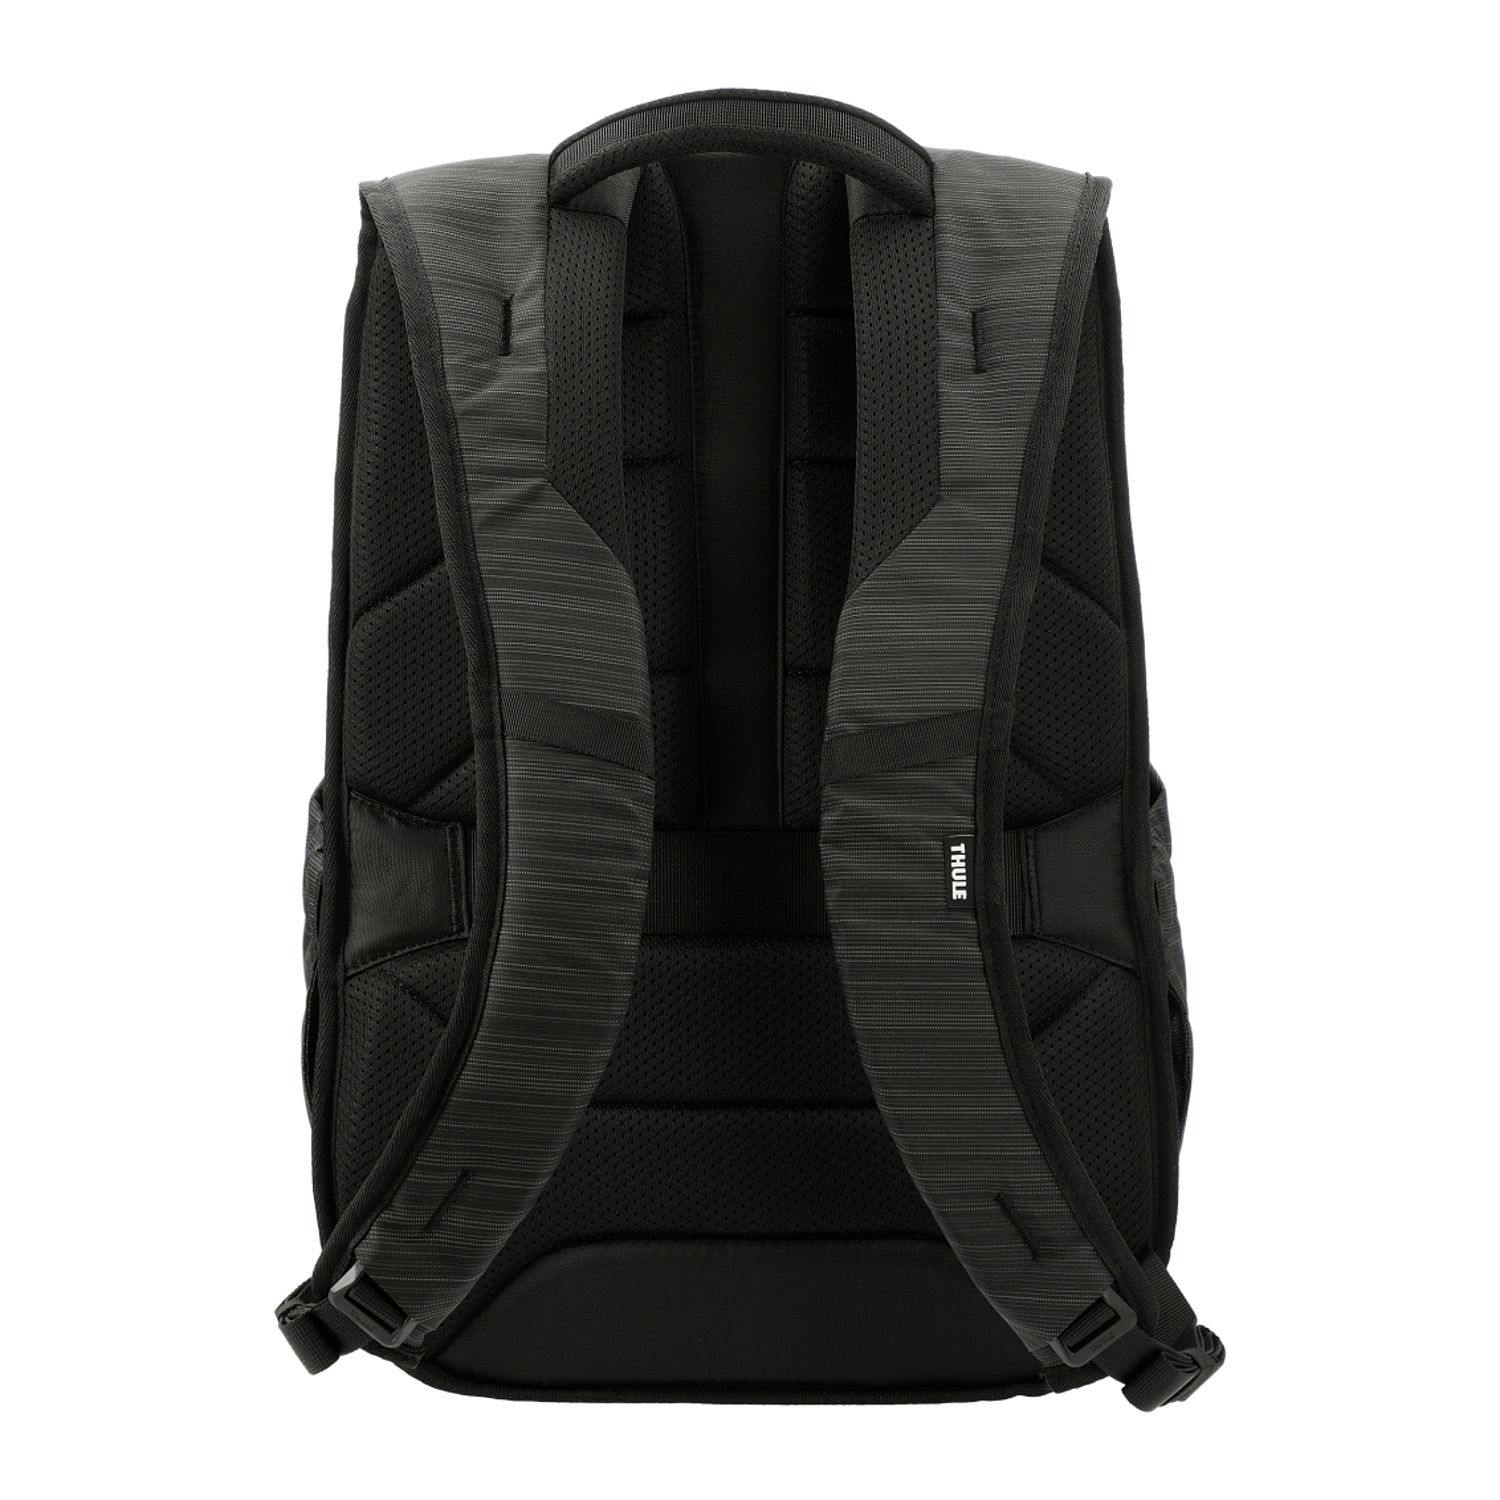 Thule Construct 15" Computer Backpack 24L - additional Image 1